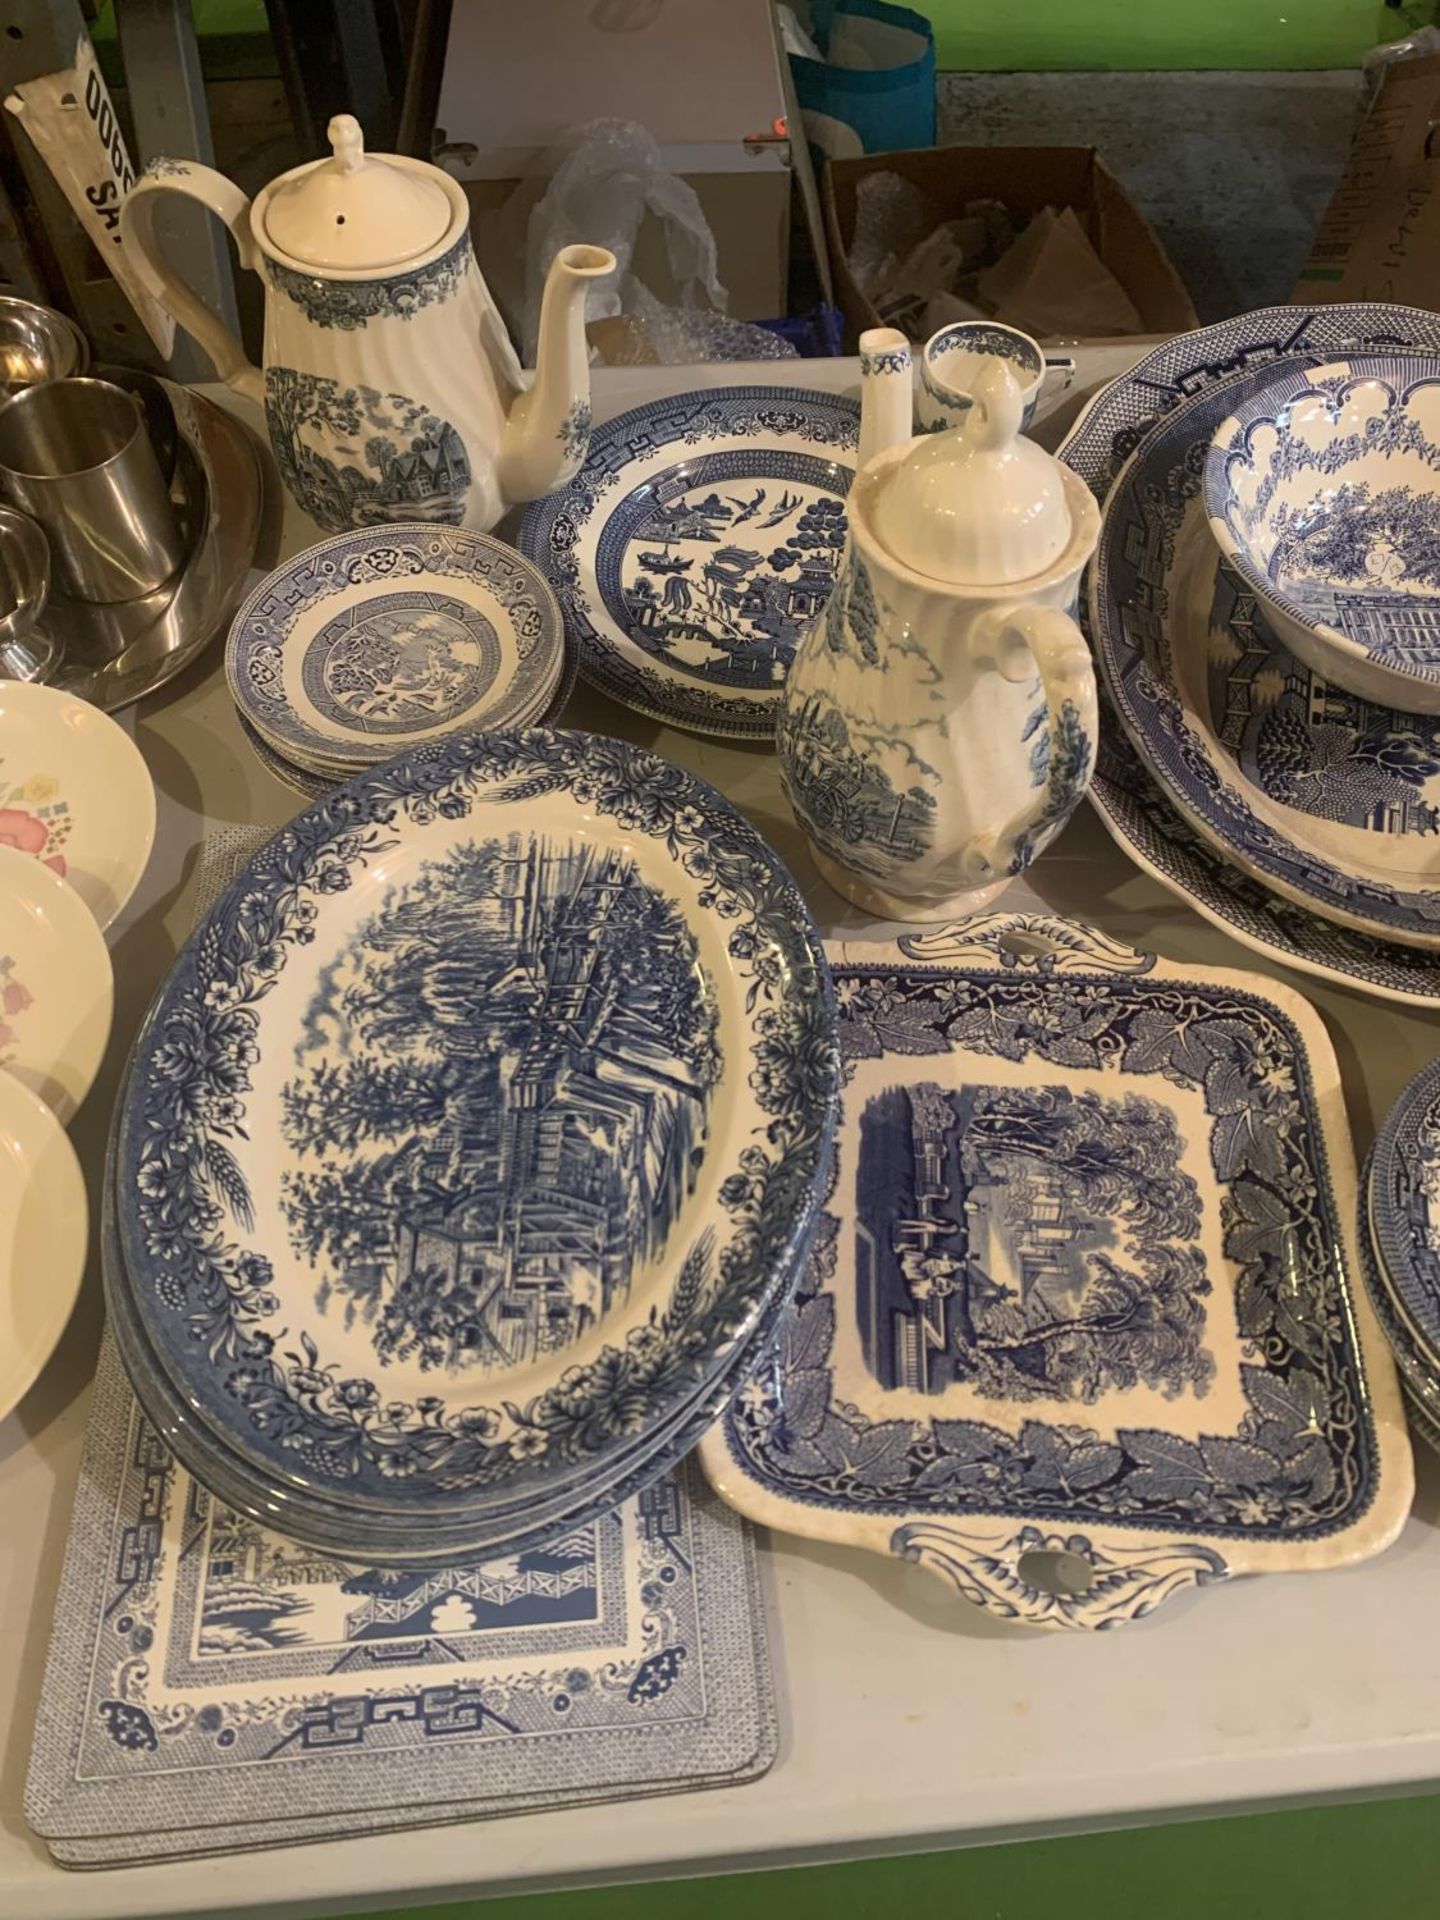 A LARGE ASSORTMENT OF BLUE AND WHITE DECORATIVE CERAMICS TO INCLUDE TEAPOTS, PLATES AND PLACE MATS - Image 2 of 4